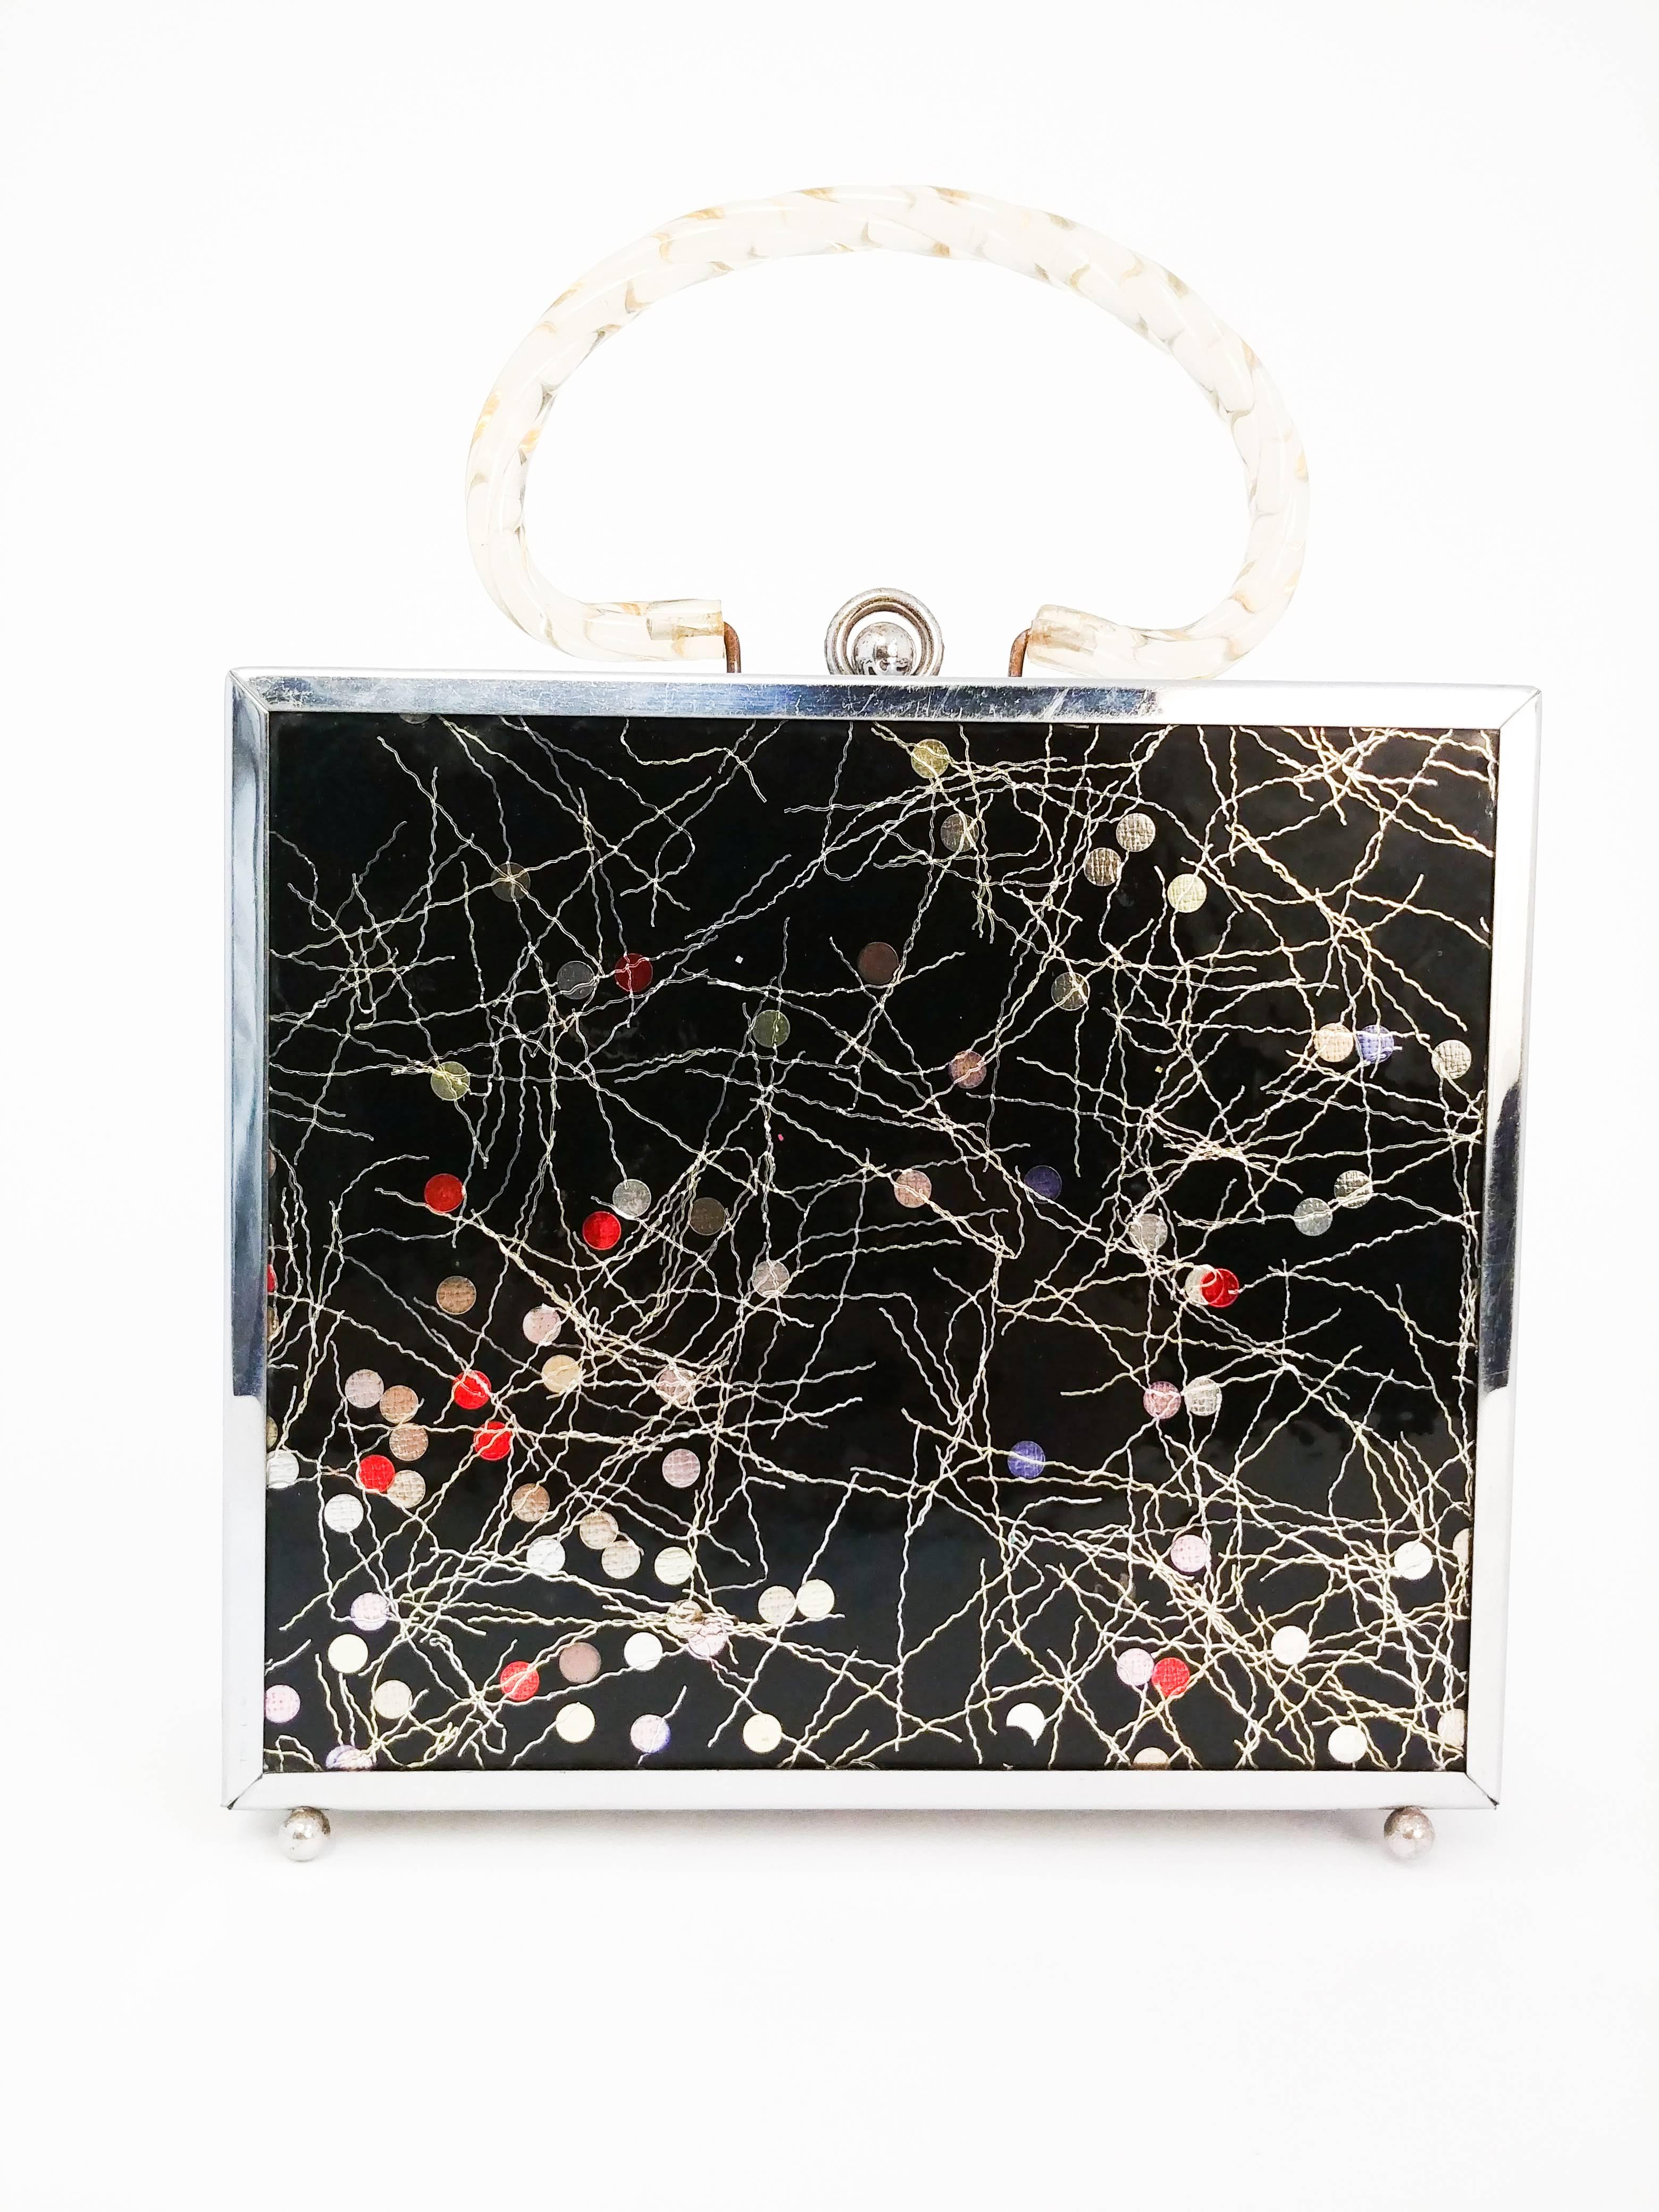 1950s Novelty Metal Purse w/ Lucite Handles. Early plastic front and back with abstract dot and line details, metal sides with cutouts, and metal feet. Lucite handles, printed lining with clean interior. 